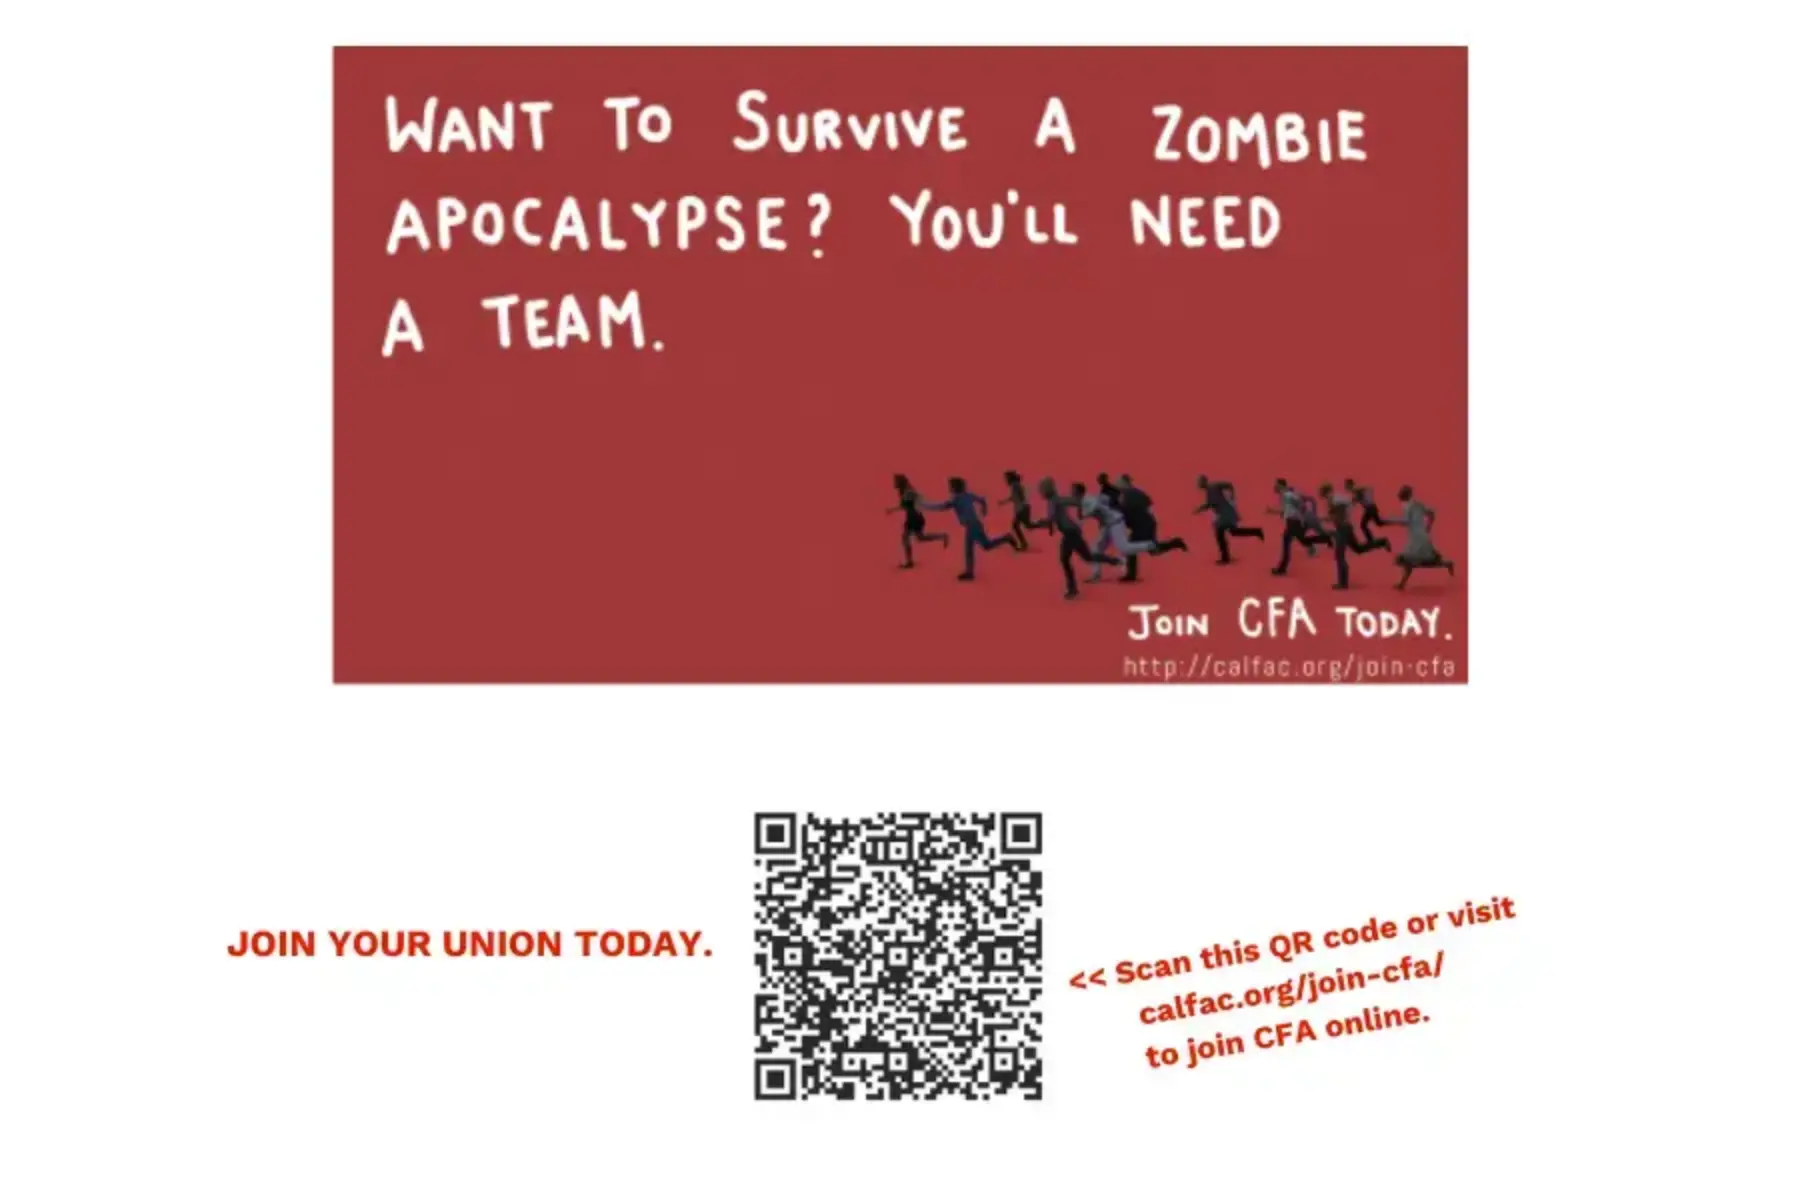 White background with a maroon graphic toward the top featuring small black and gray figures running away from something. The maroon graphic includes white text that reads want to survive a zombie apocalypse? You'll need a team. Join CFA today. http://calfac.org/join-cfa. Below the maroon graphic is a black and white QR code. The the left is red uppercase text that reads Join your union today. To the right is red text that reads Scan this QR code or visit calfac.org/join-cfa/ to join CFA online.